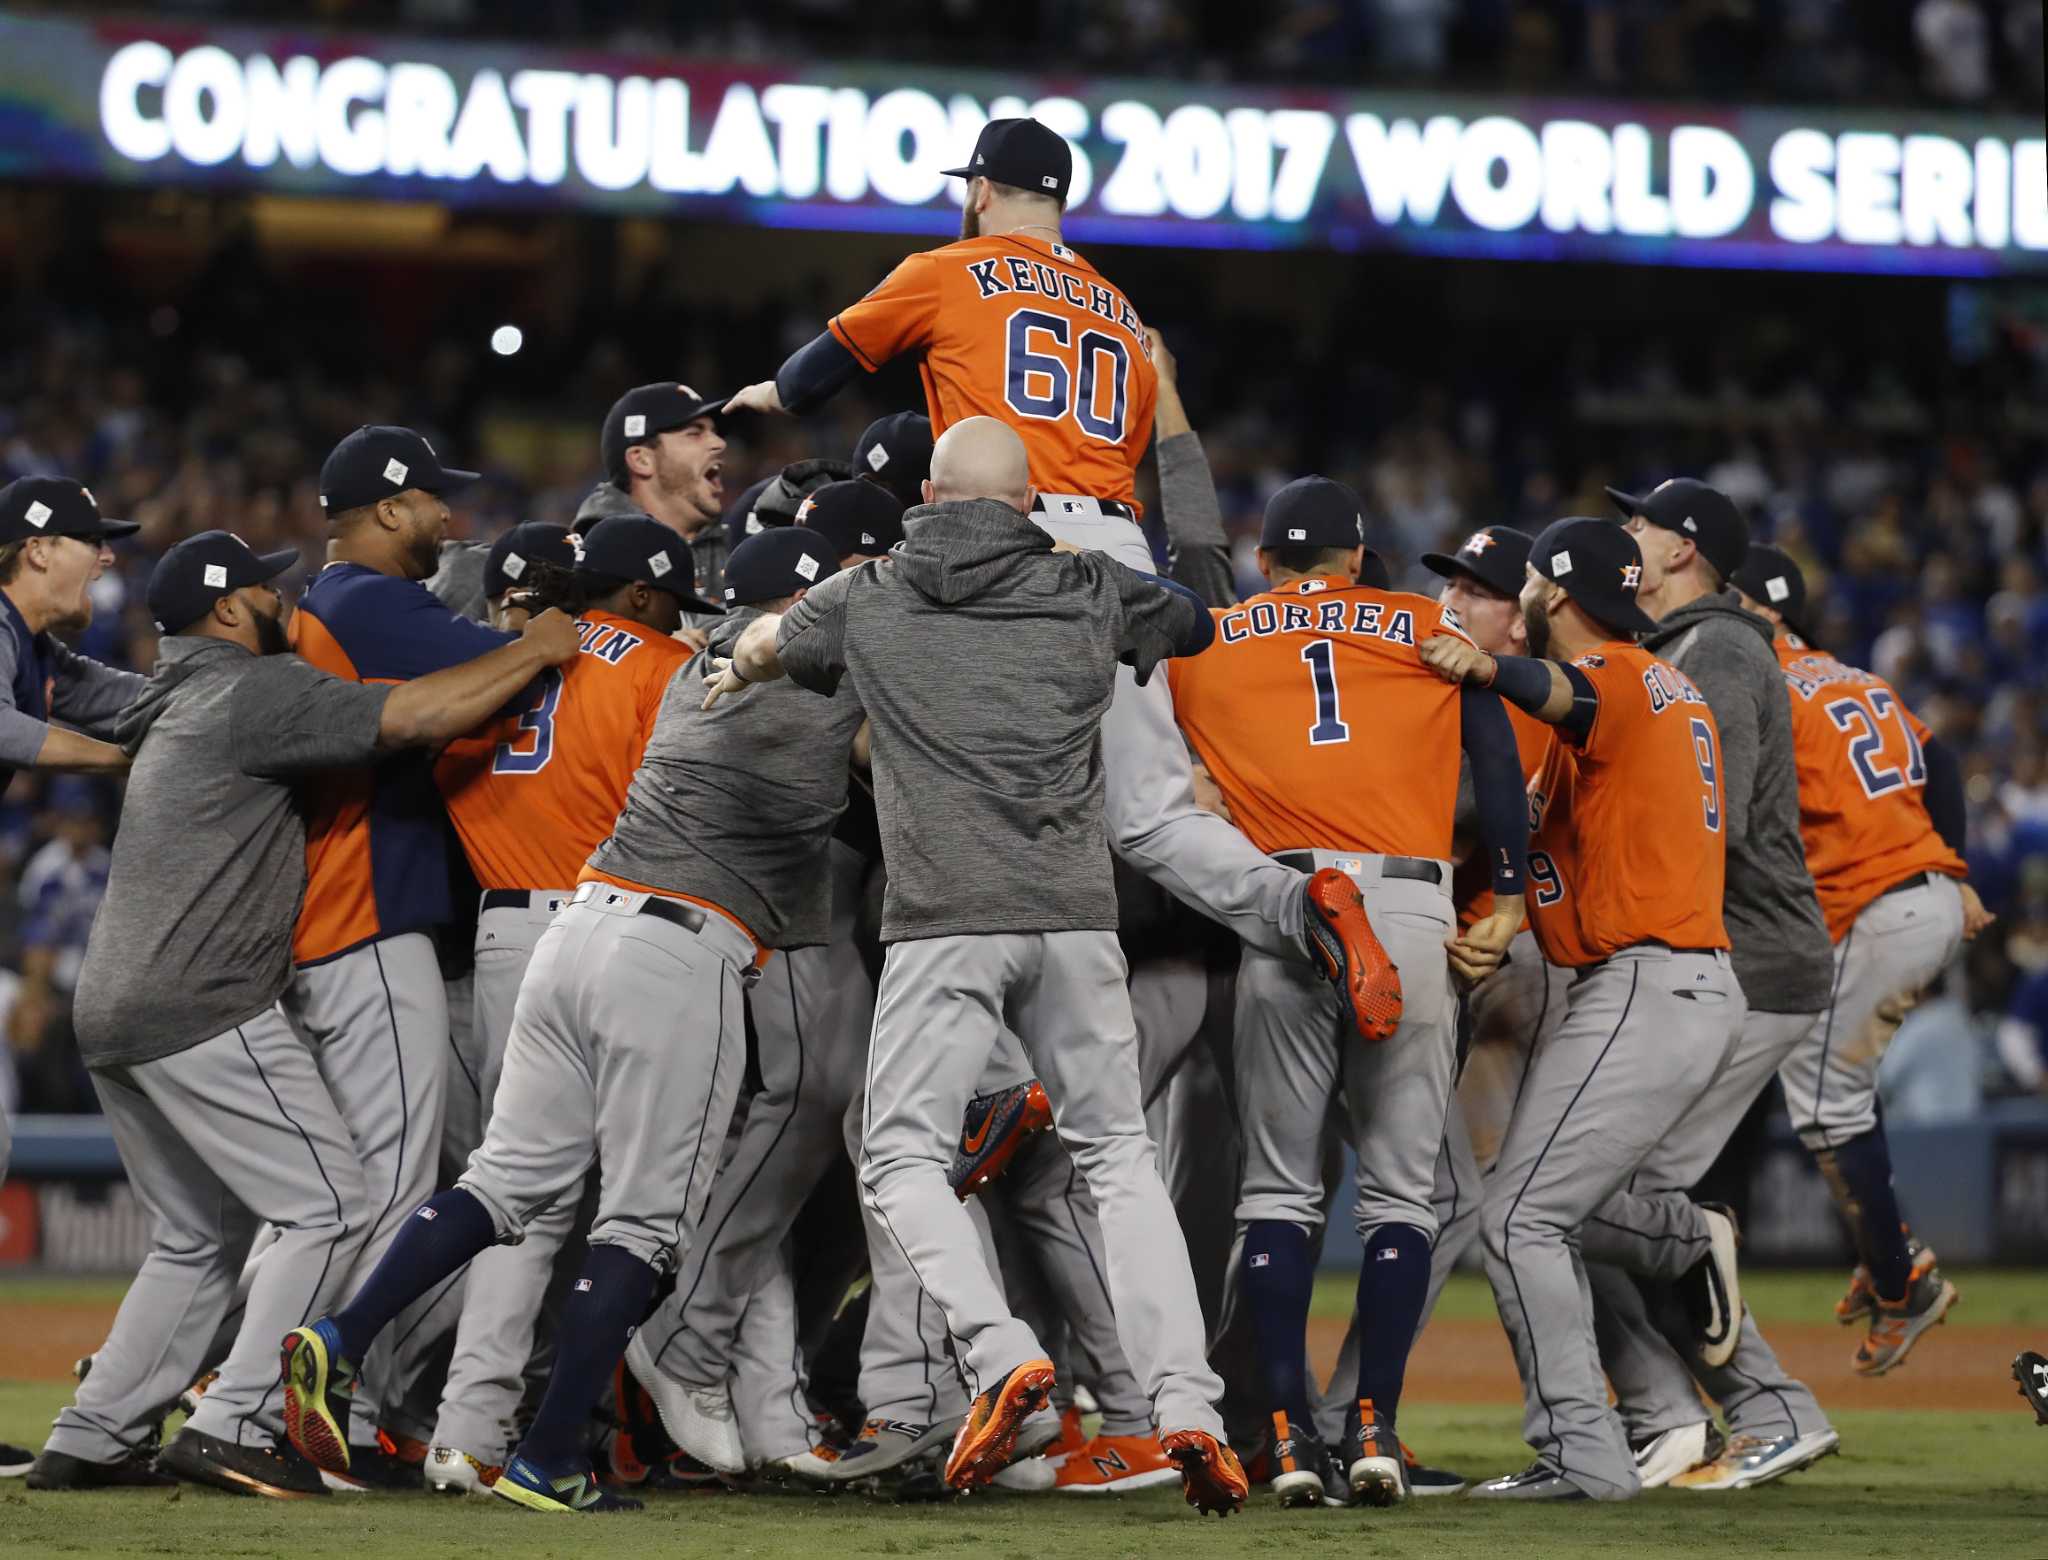 Astros fans shouldn't feel guilty about the 2017 World Series - Los